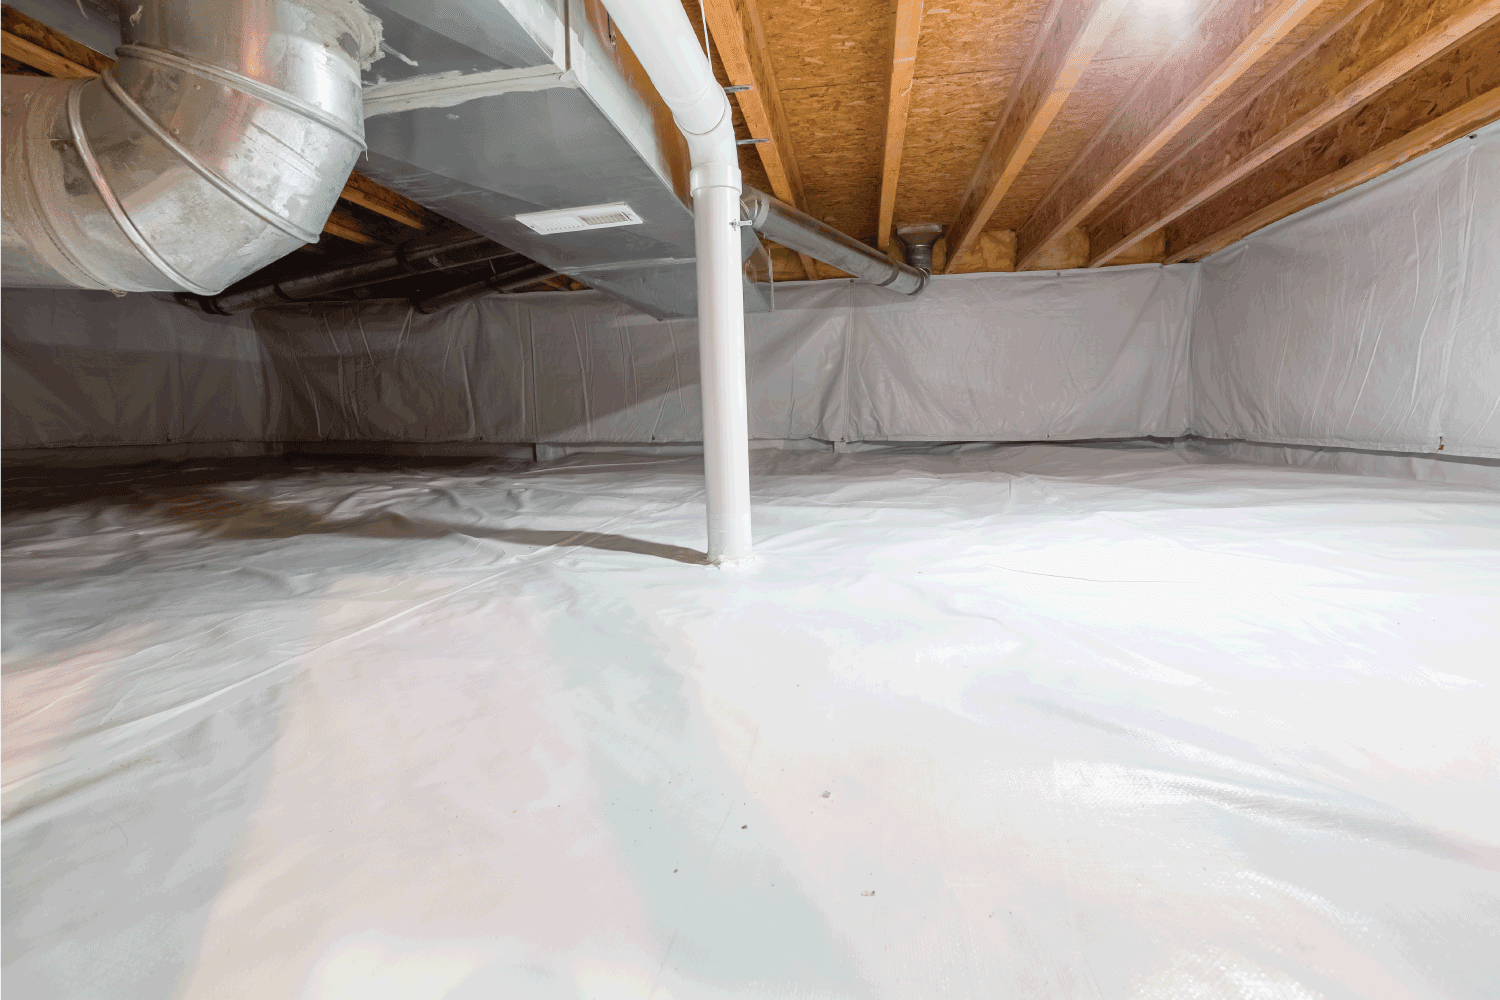 Crawl space fully encapsulated with thermoregulatory blankets and dimple board. Radon mitigation system